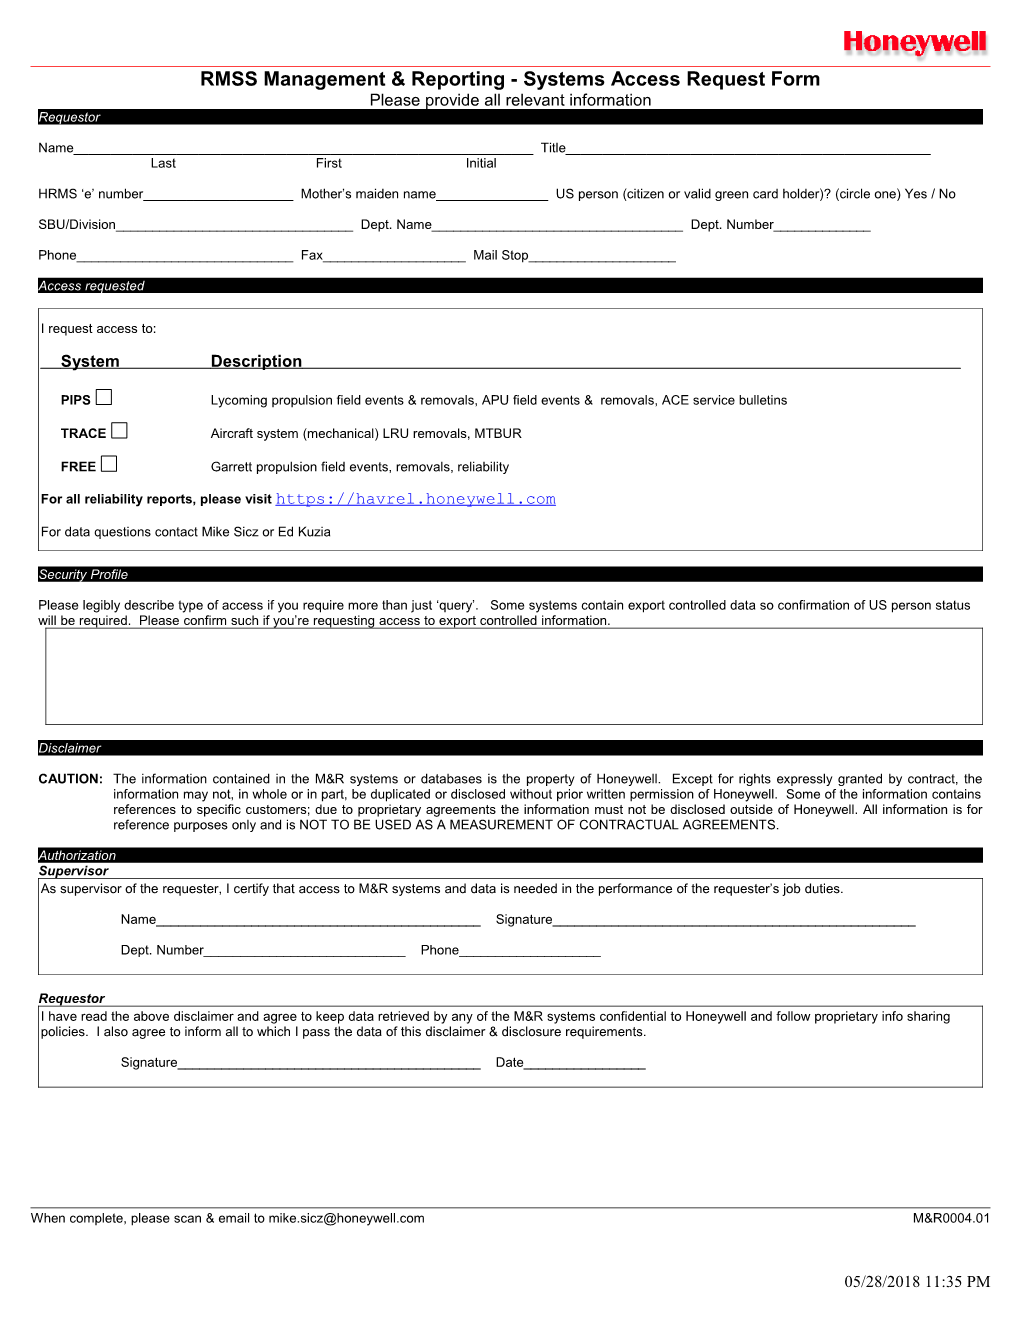 RMSS Management & Reporting - Systems Access Request Form